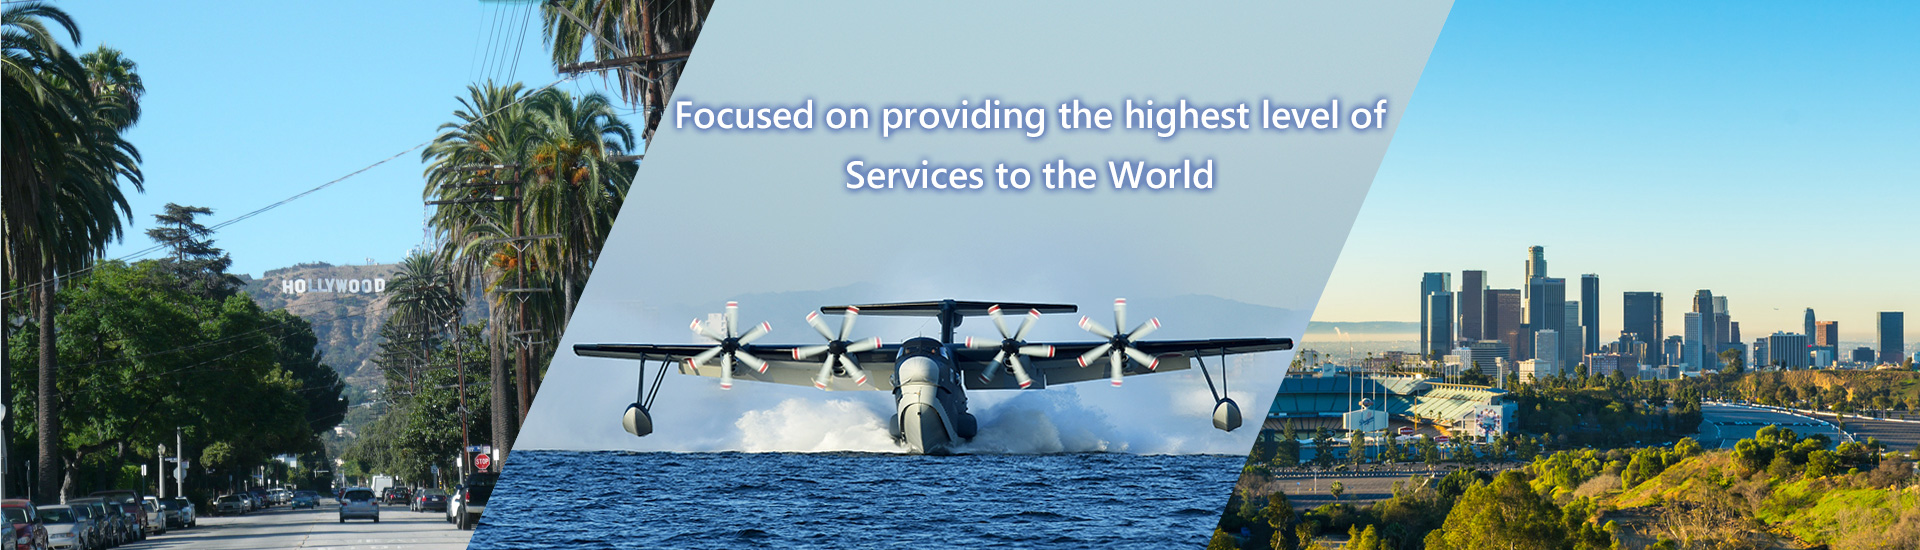 Focused on providing the highest level of Services to the World